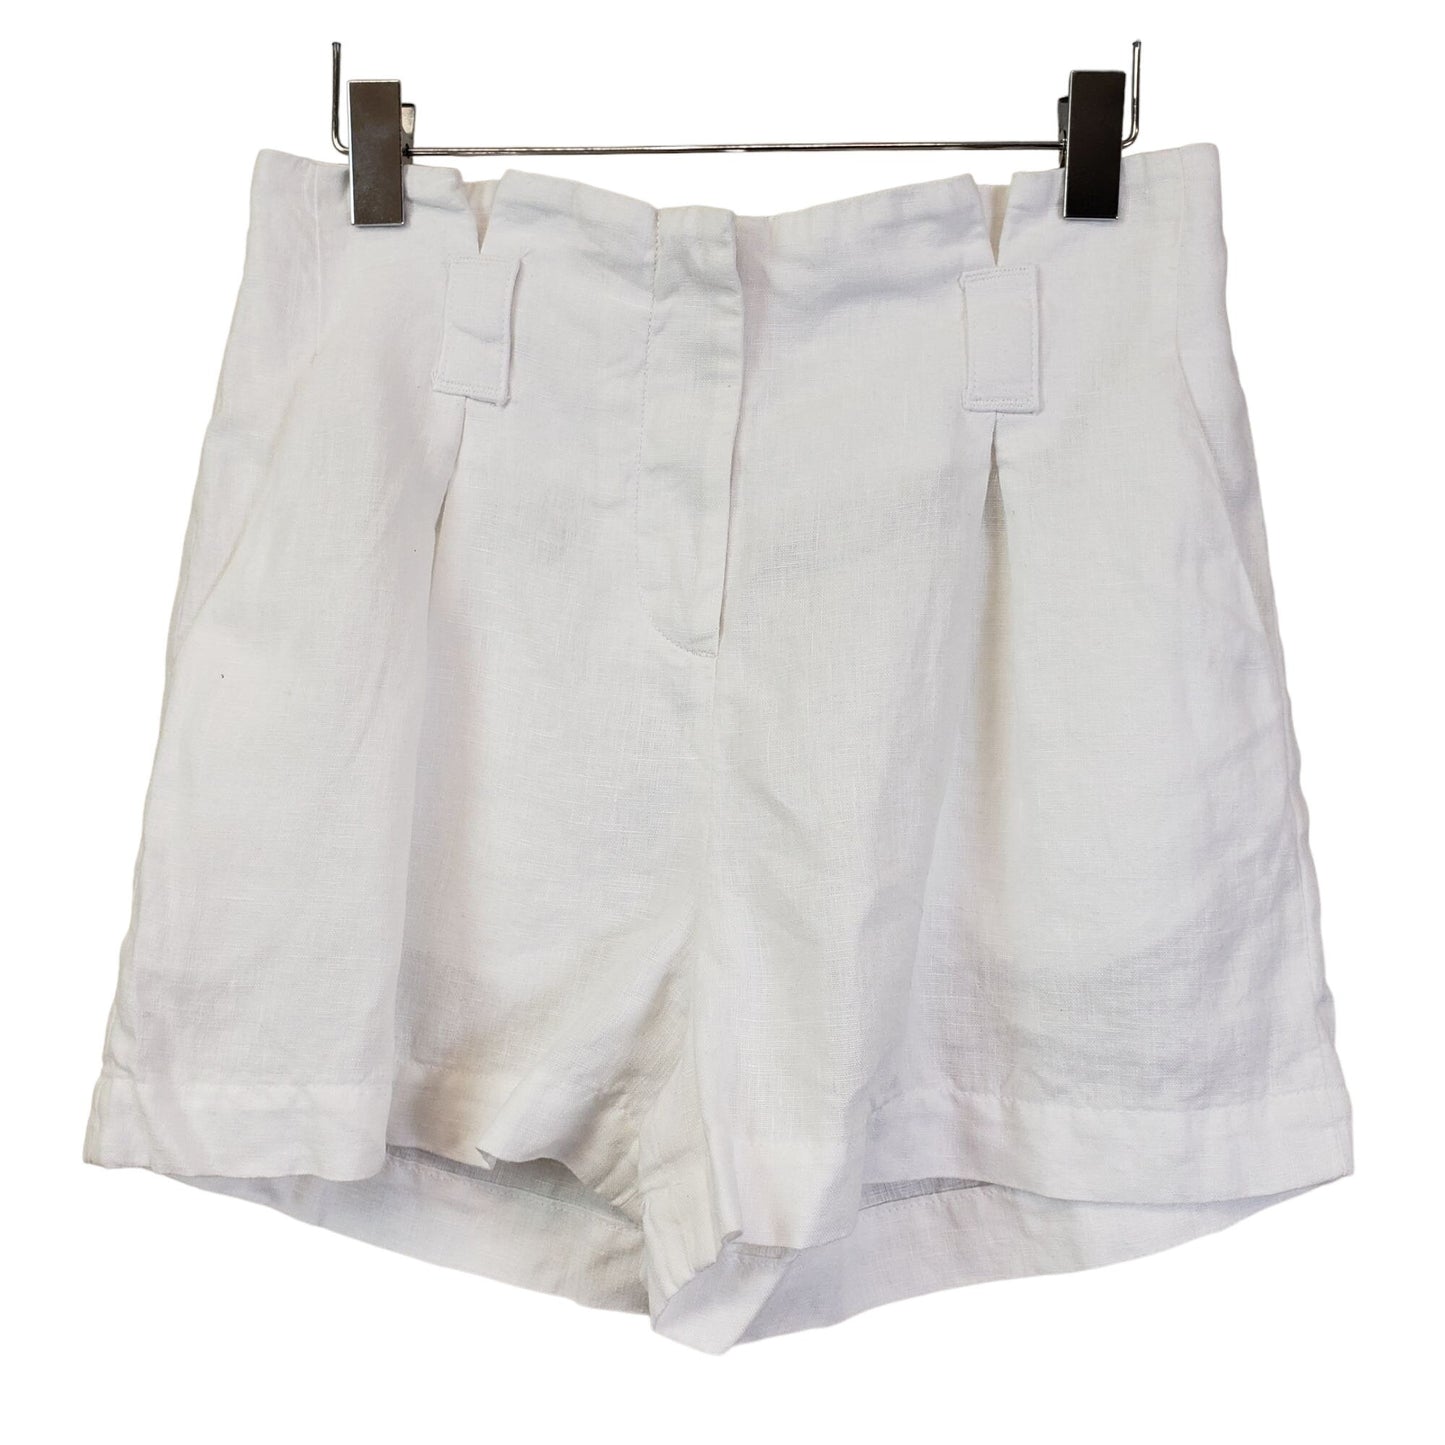 NWT L'Agence Hillary High Waisted Linen Shorts Size 25 *Missing Belt*